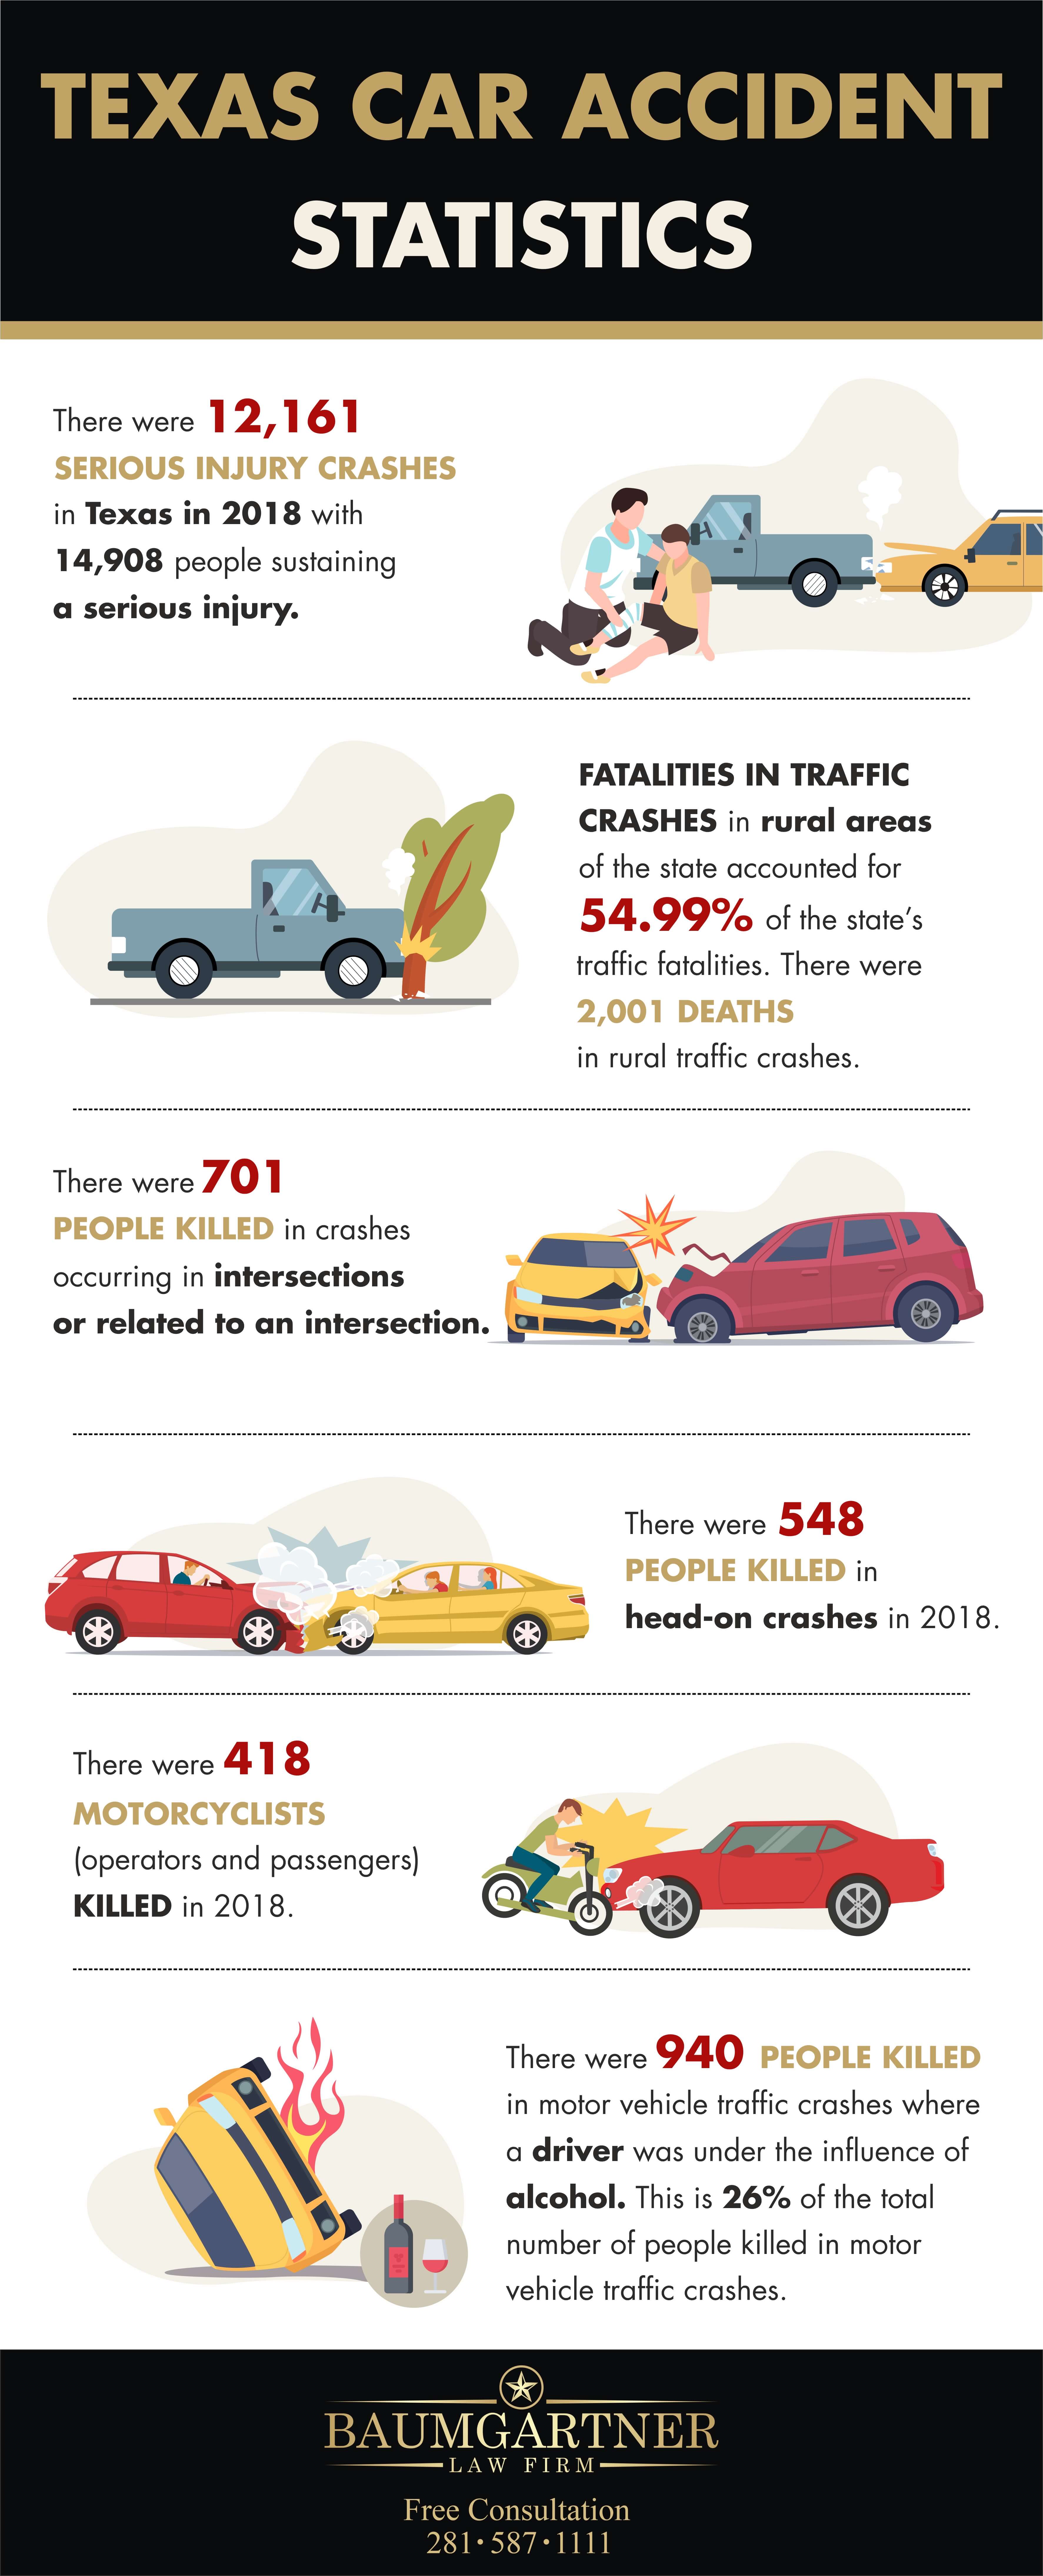 Fatal-Car-accident-statistics-in-Texas-infographic-plaza